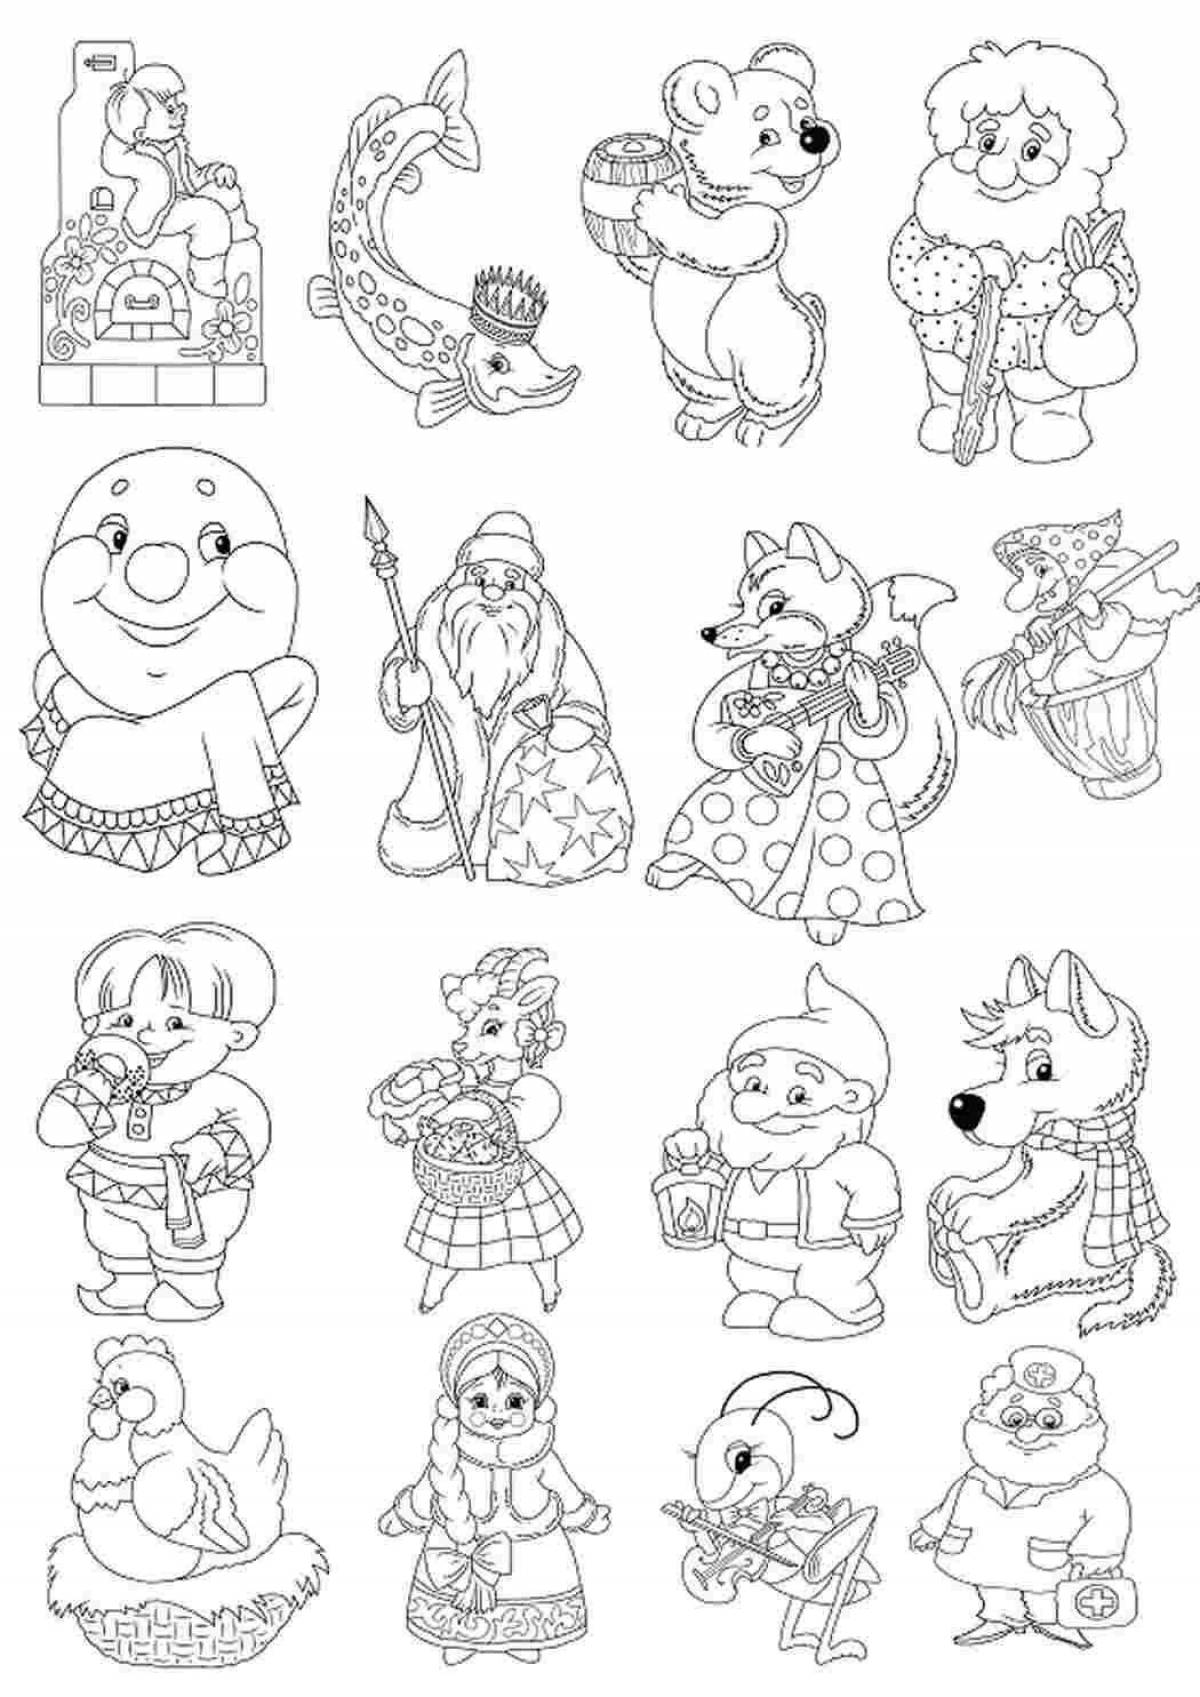 Cute coloring many on one sheet, small